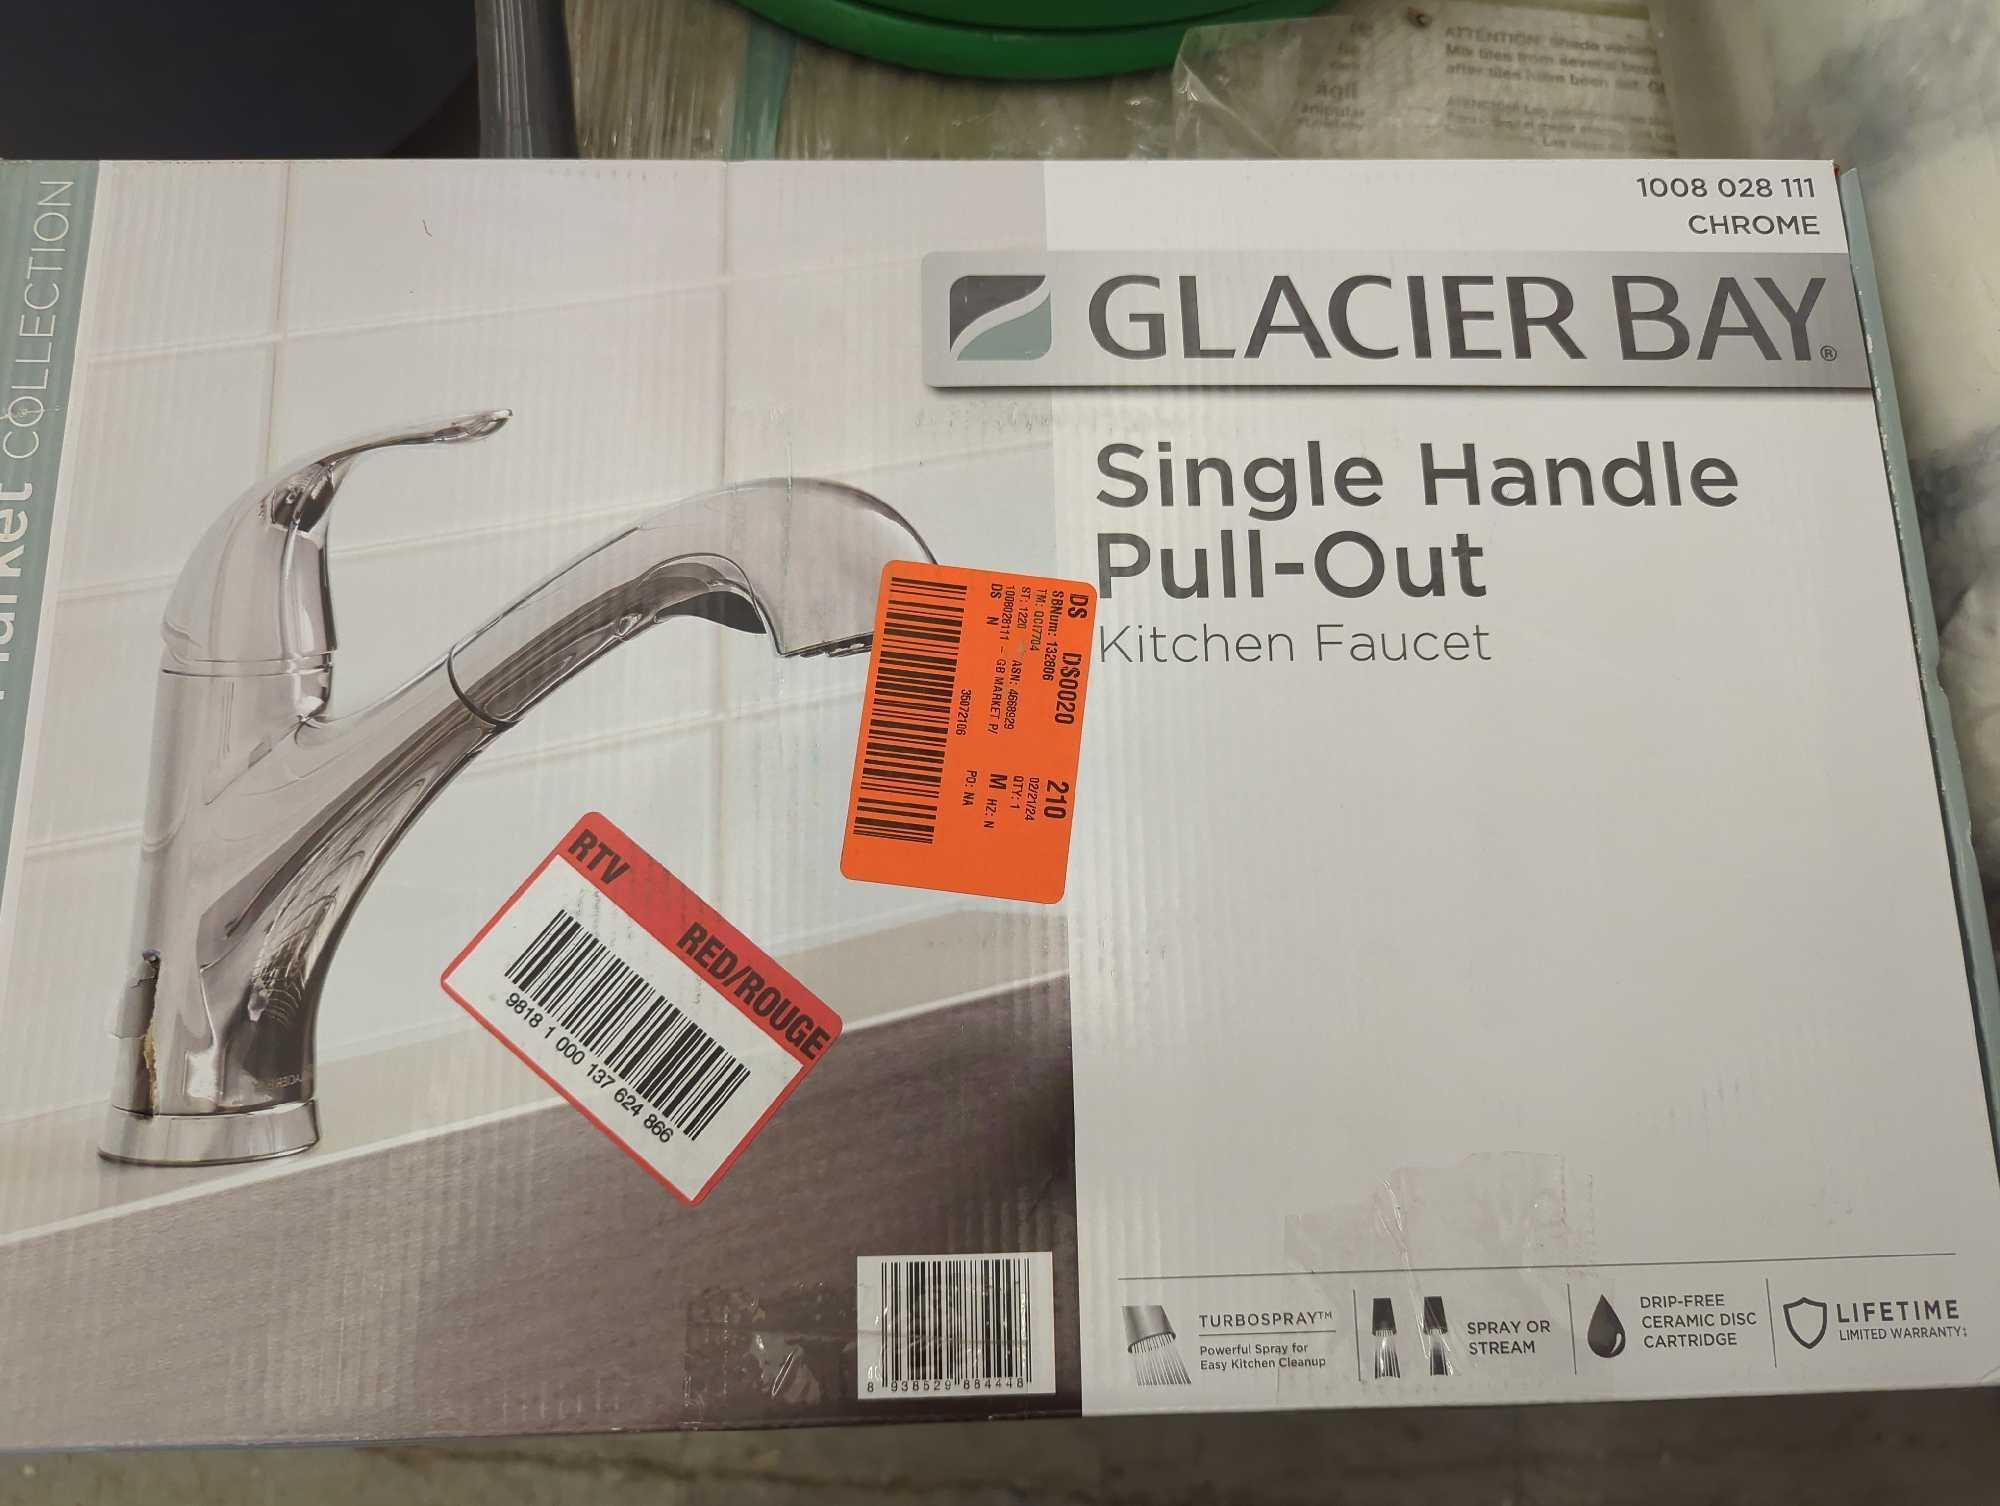 Glacier Bay Market Single-Handle Pull-Out Sprayer Kitchen Faucet in Polished Chrome, Appears to be